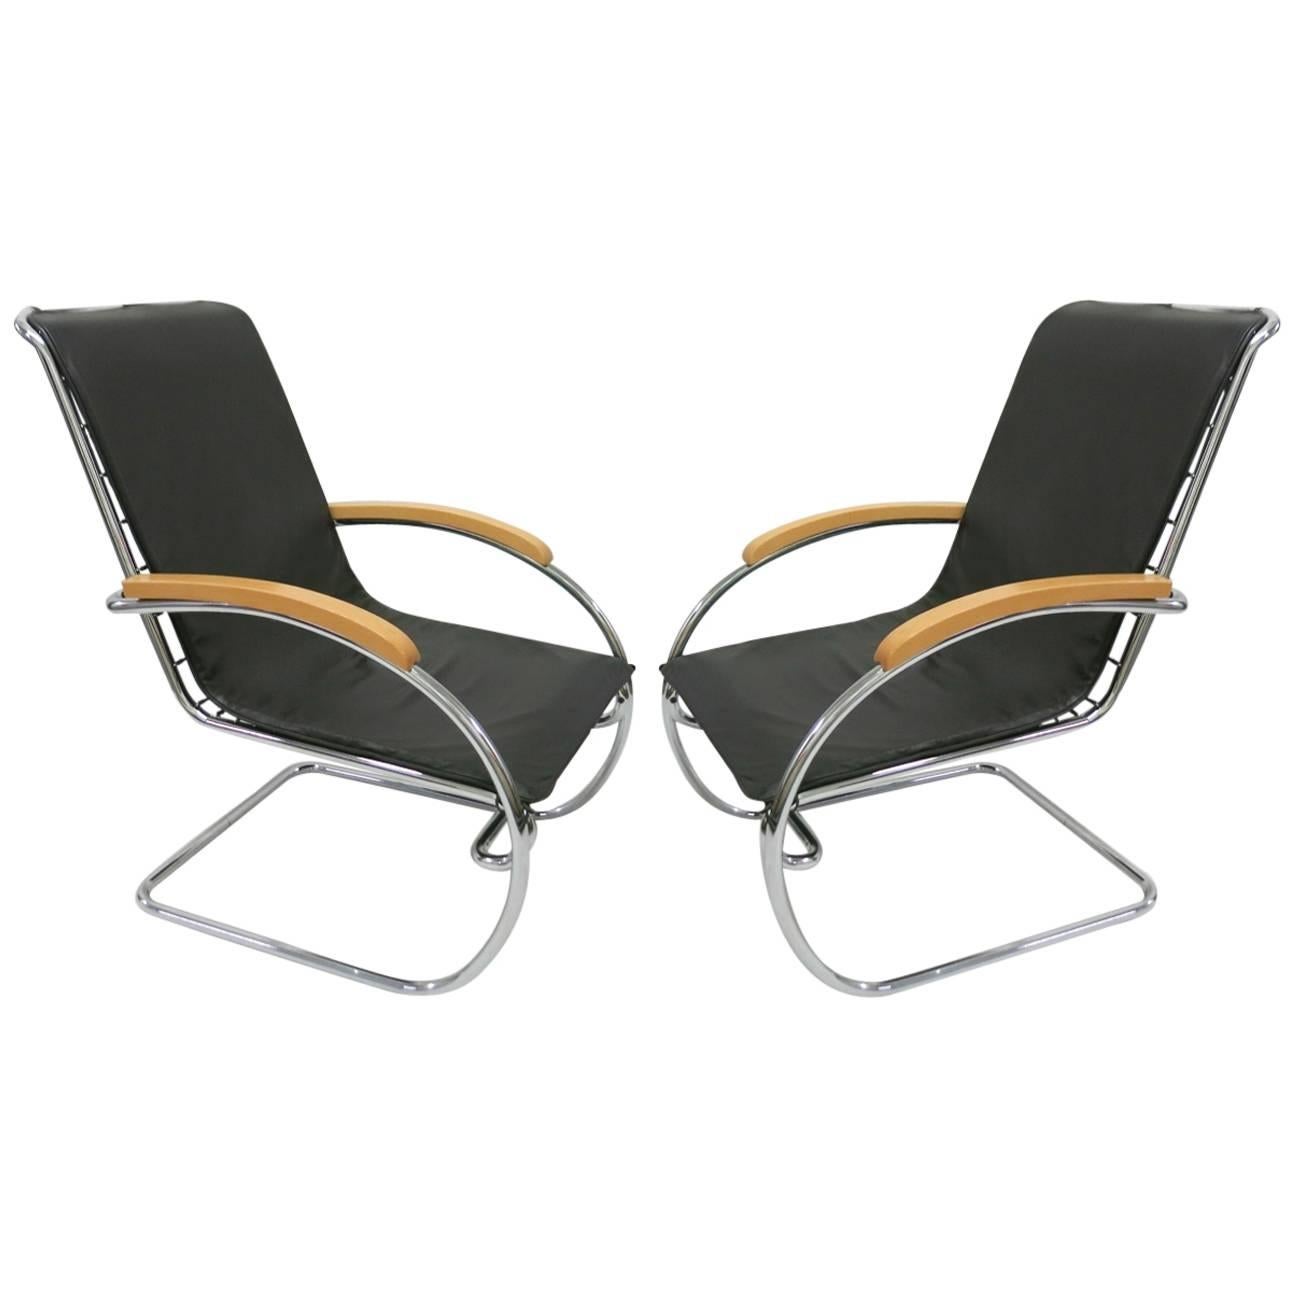 Pair of Lounge Chairs Designed by Anton Lorenz for Thonet